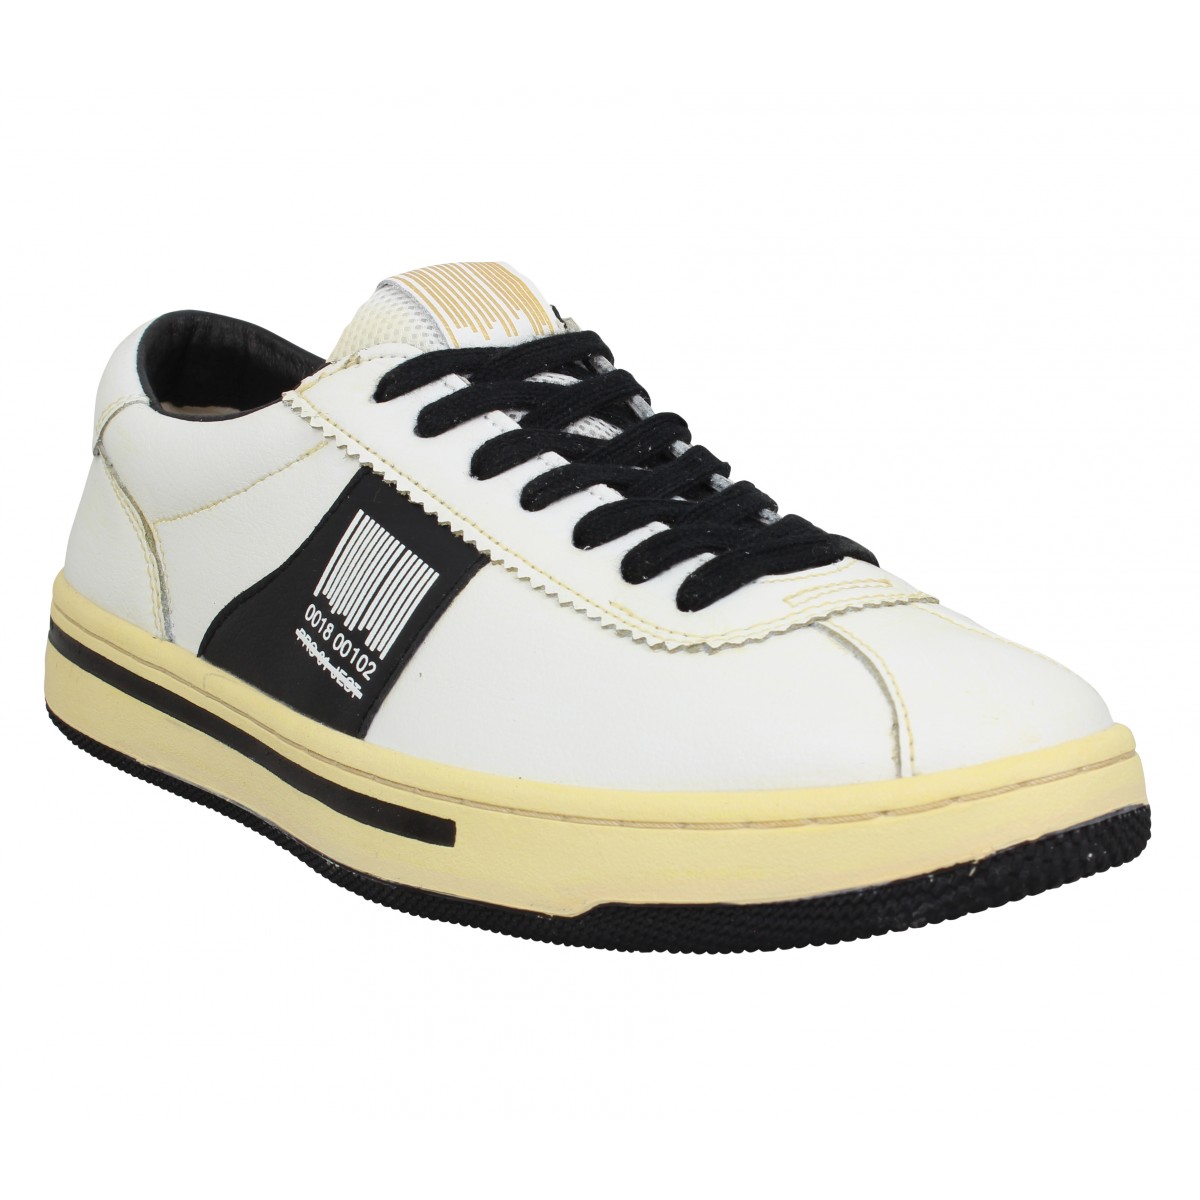 Pro 01 Ject Homme P5lm Cuir -41-blanc...